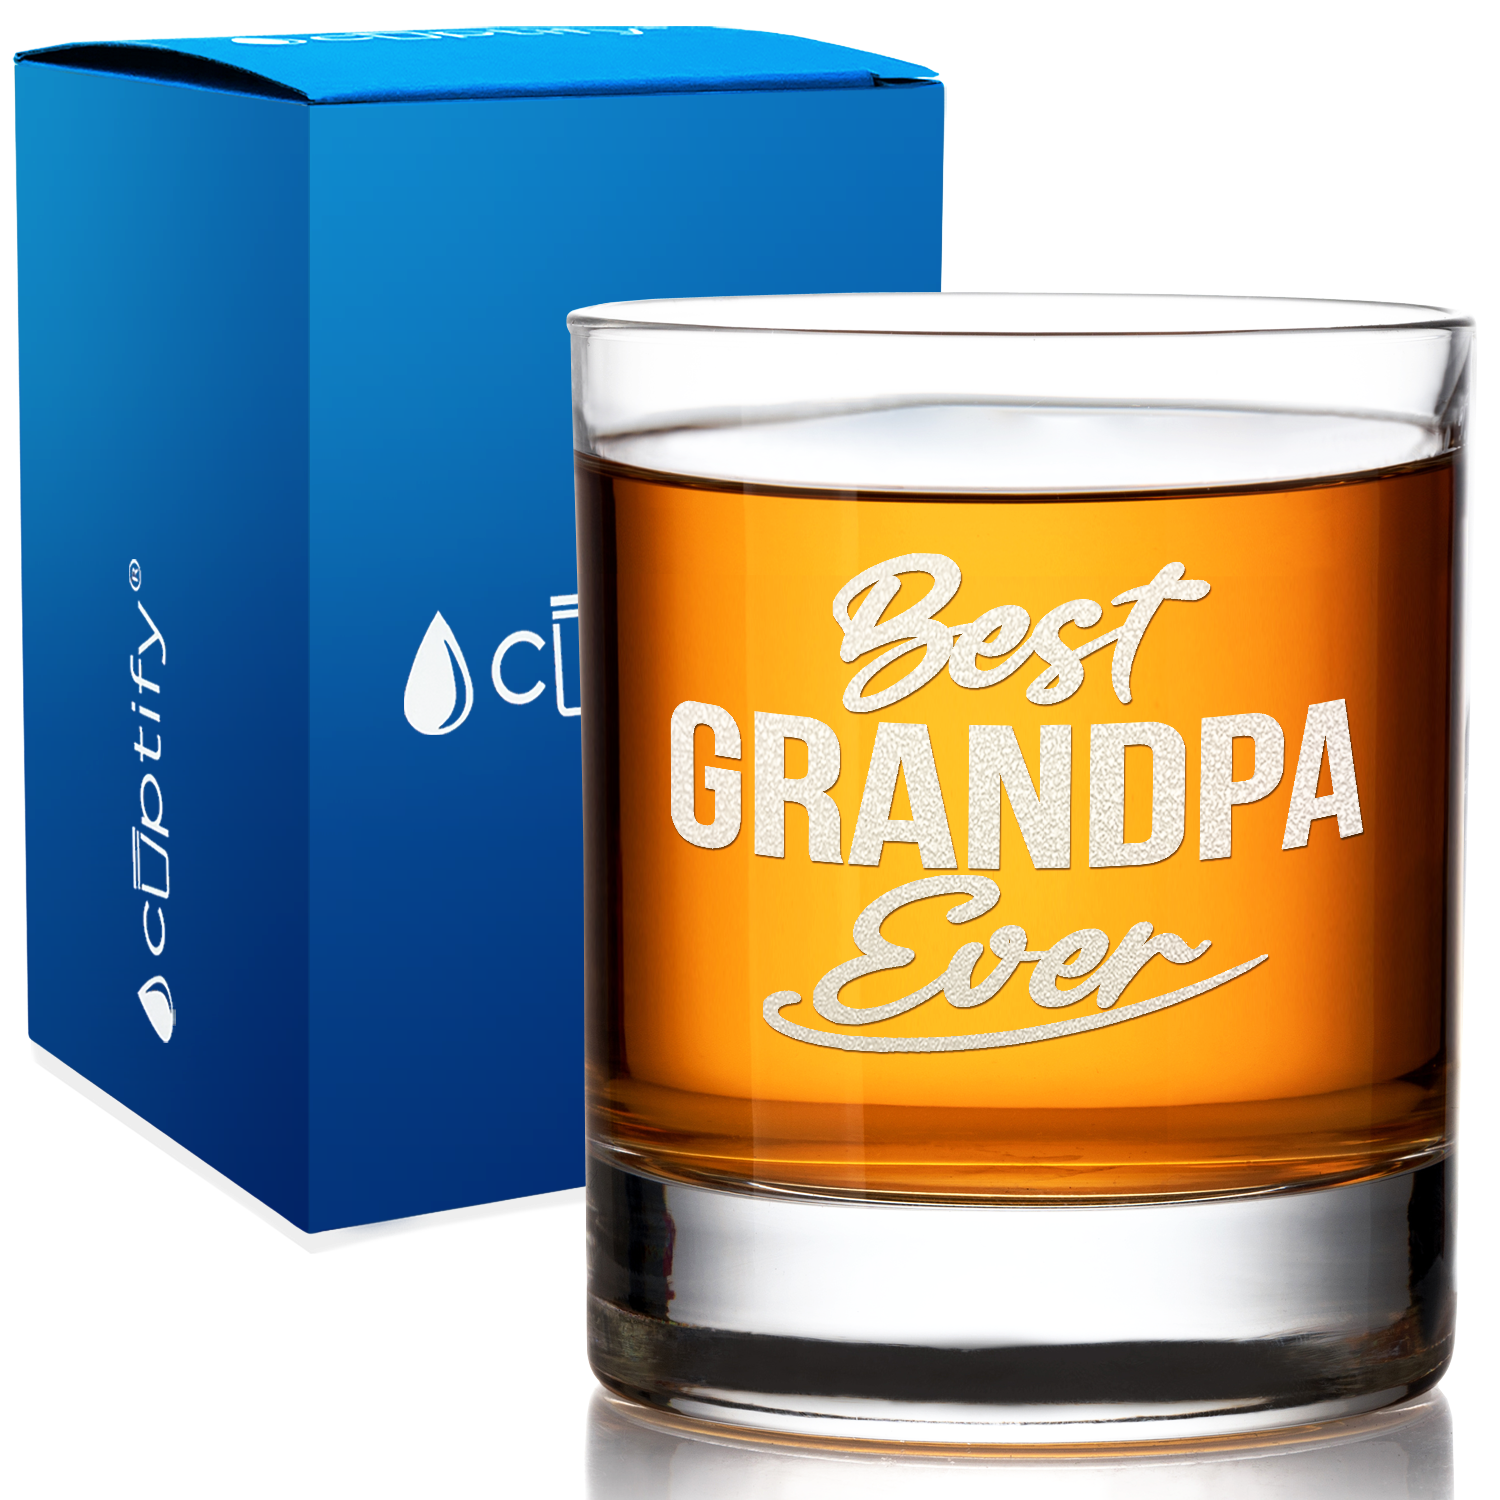 Best Grandpa Ever on 10.25oz Old Fashioned Glass